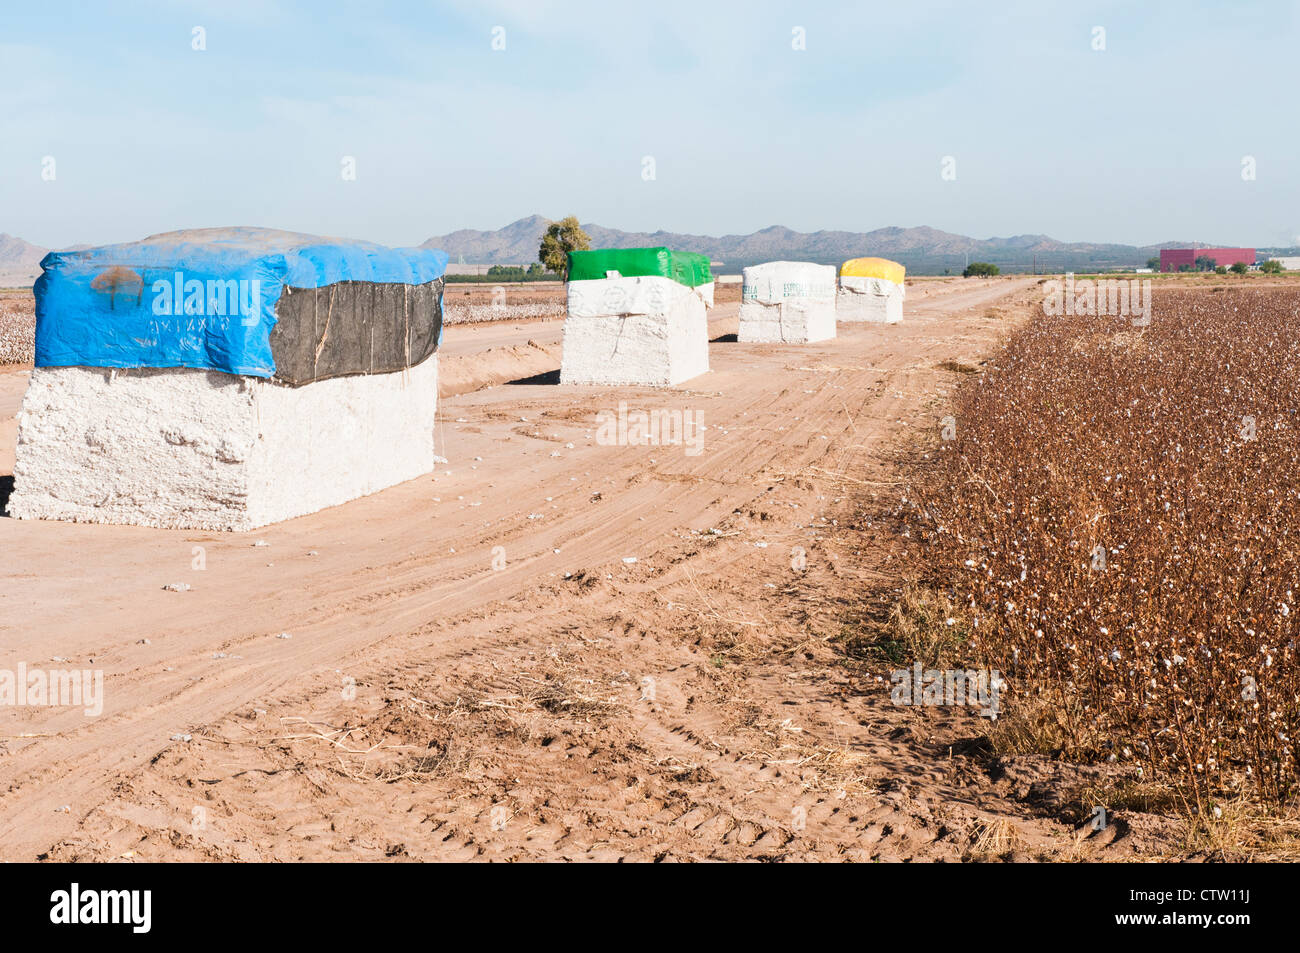 Cotton modules are shown with a harvested cotton field in the foreground. Stock Photo